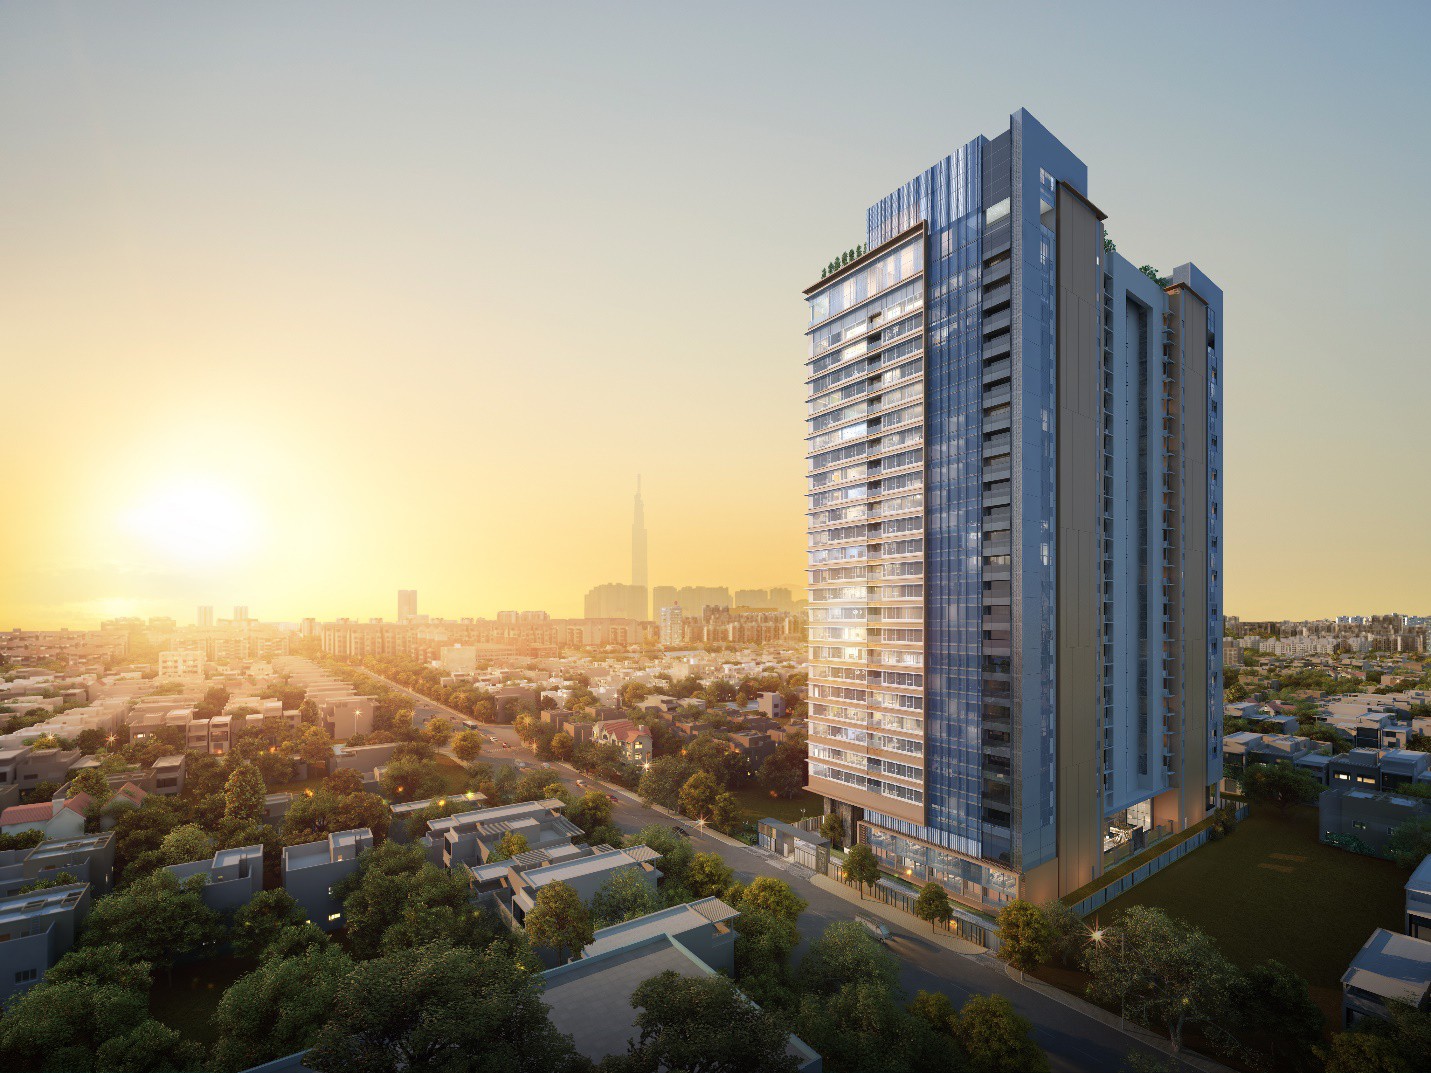 The Marq represents a ‘mark of excellence’, offering residents a vibrant and unique lifestyle.